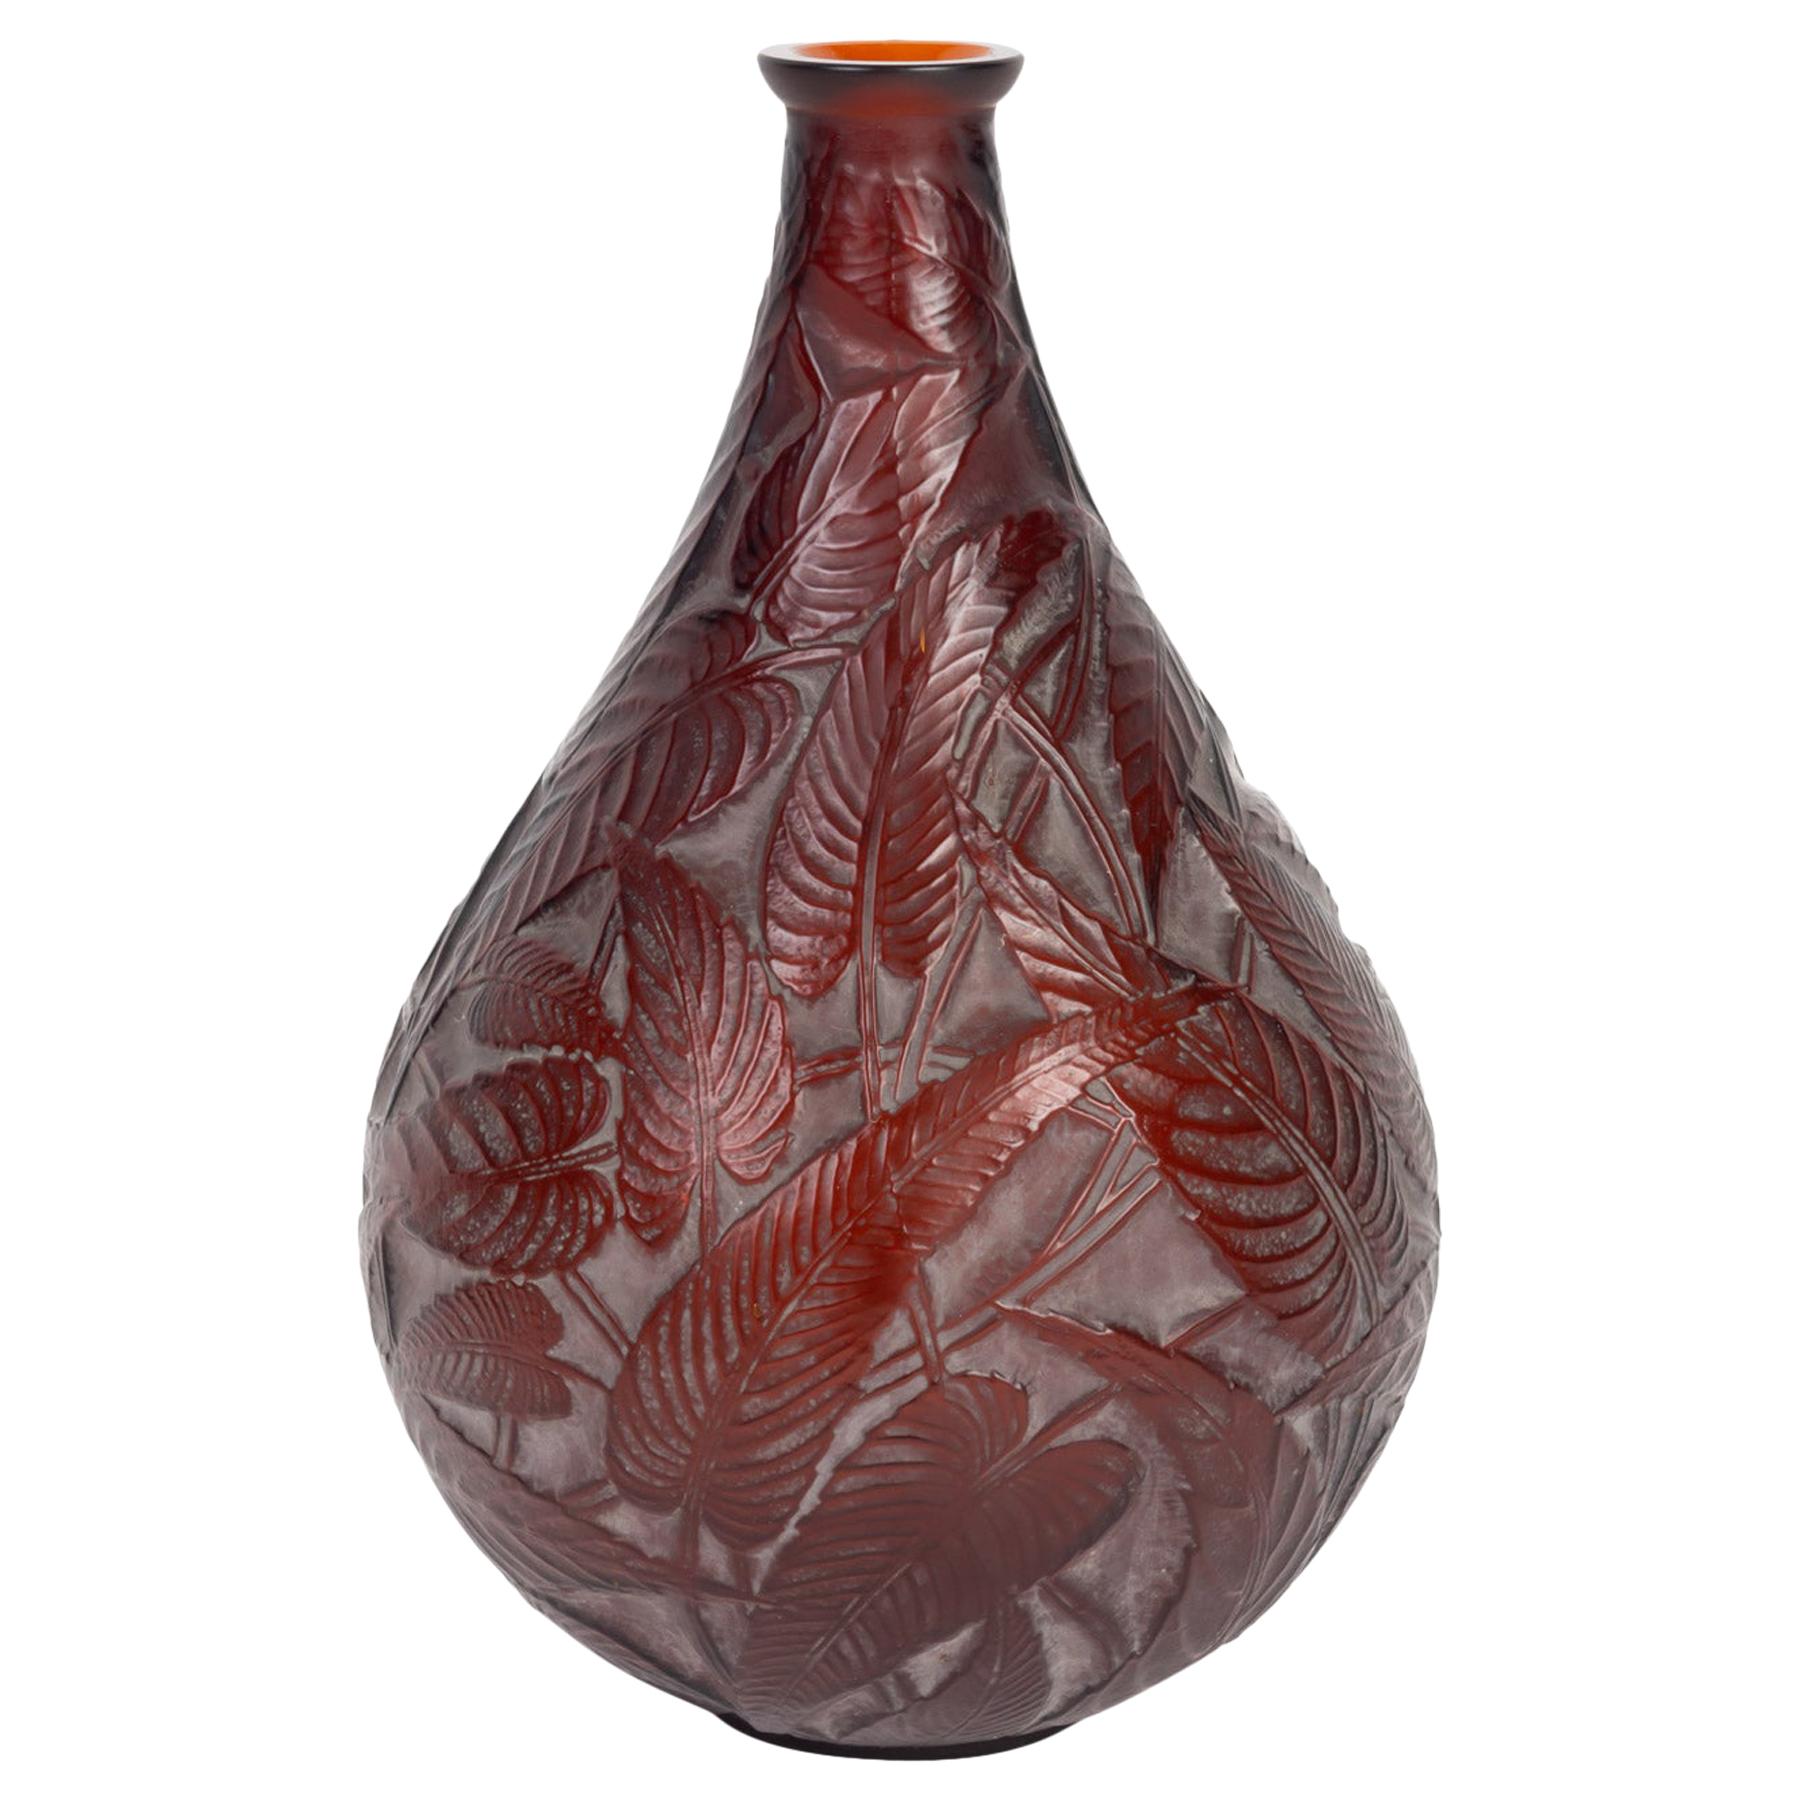 1923 René Lalique Sauge Vase in Deep Amber Glass with White Patina Sage Leaves